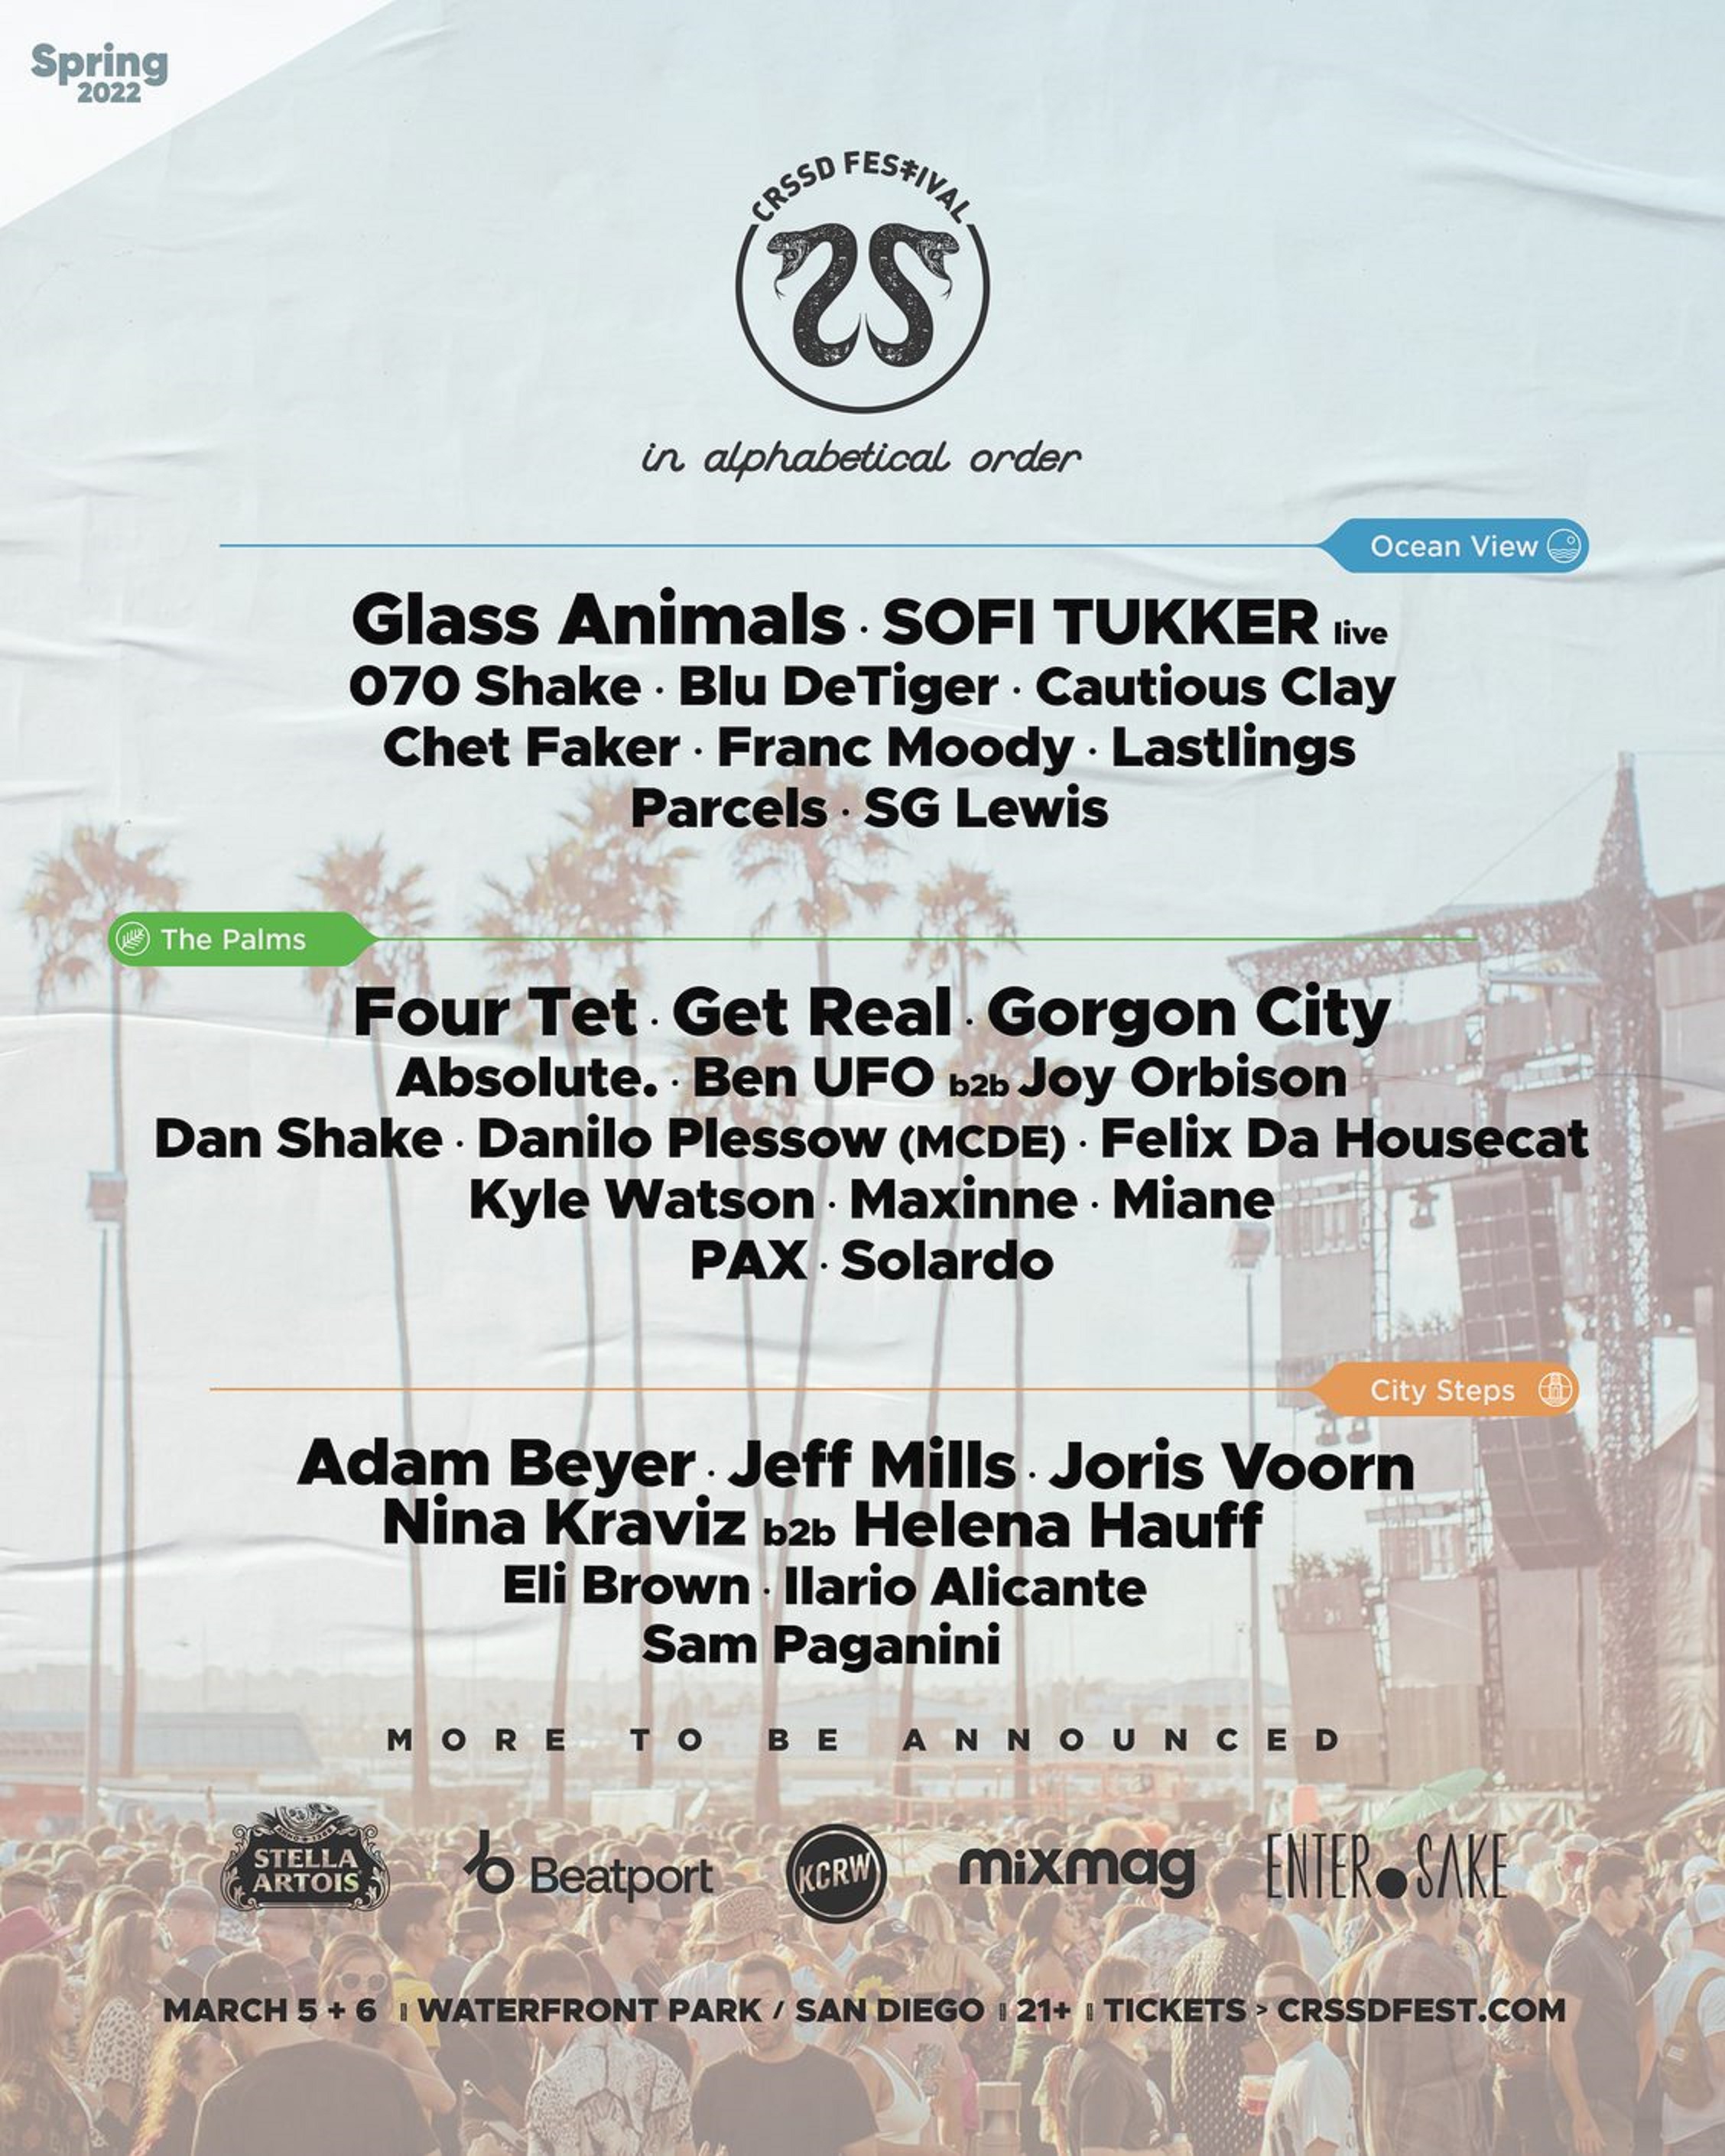 CRSSD Announces Lineup for Spring 2022 Edition